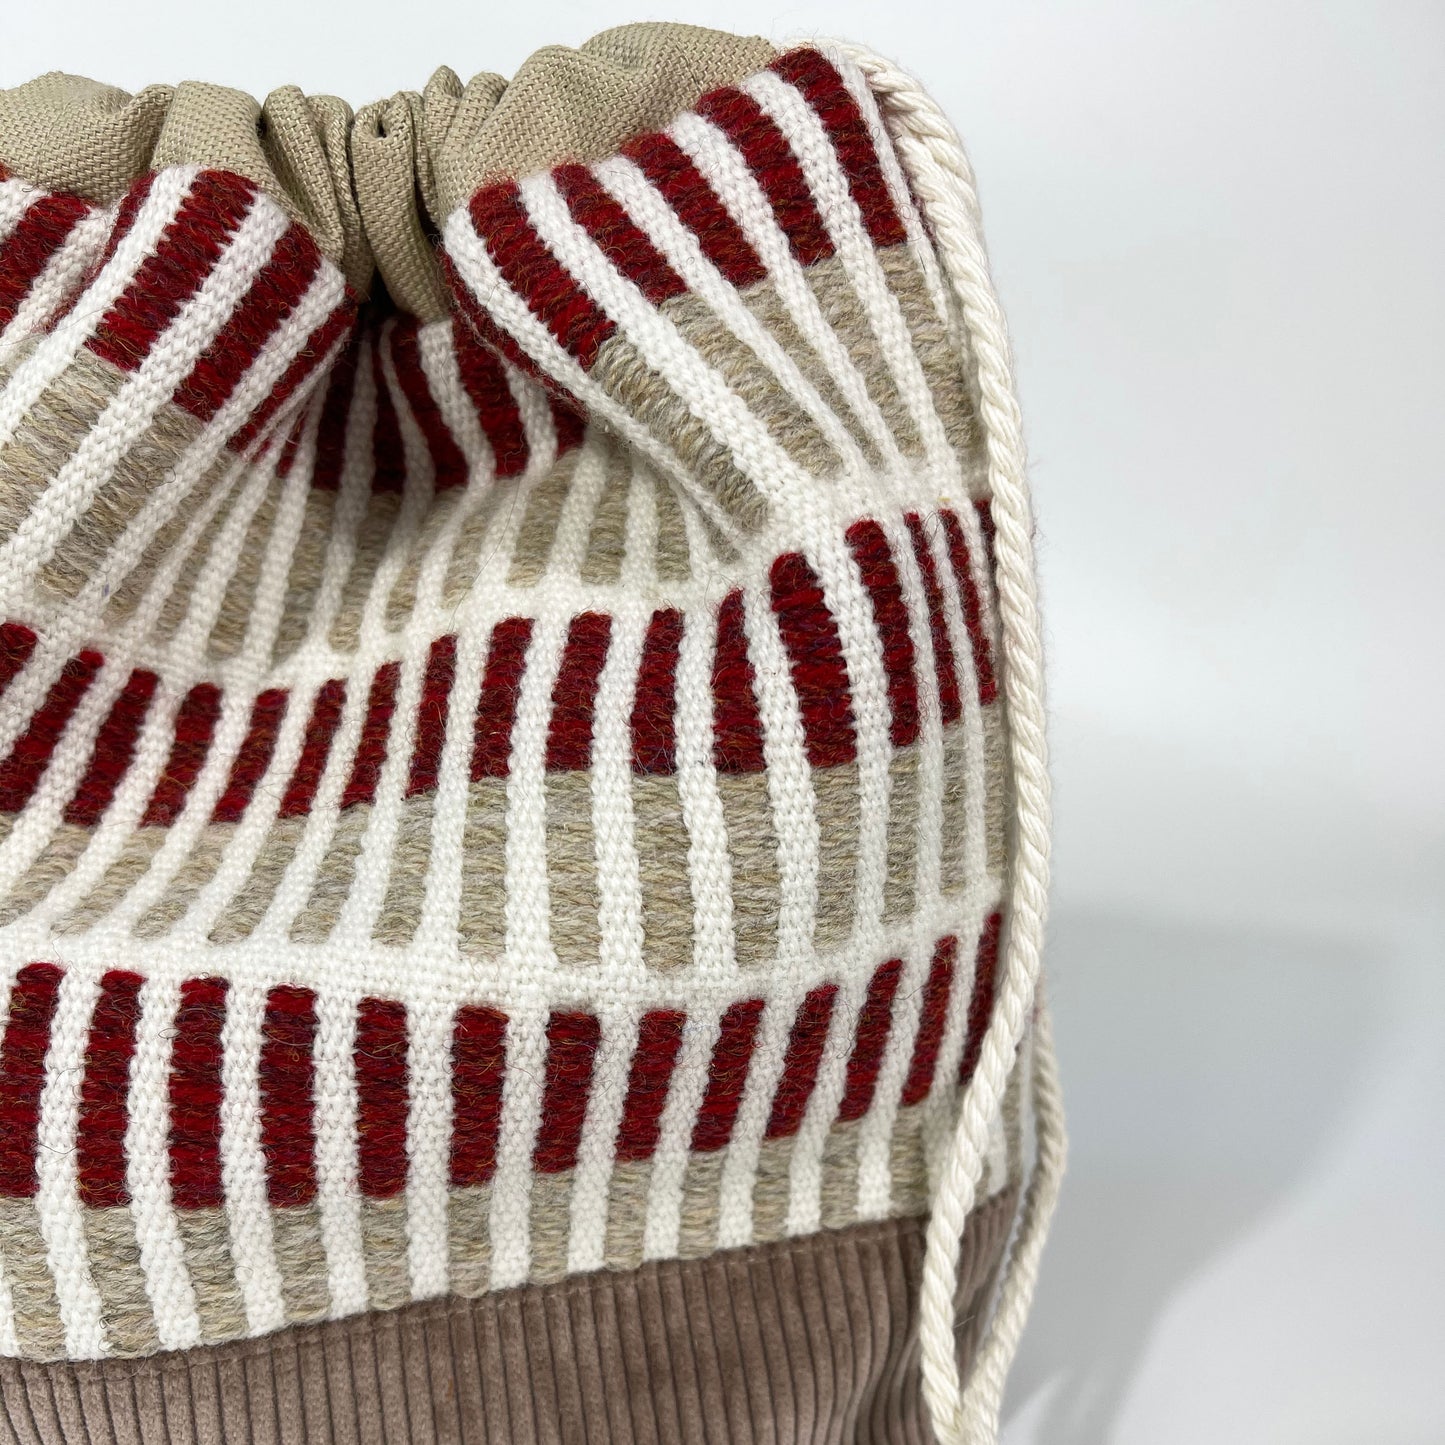 Small Project Bag - Woven